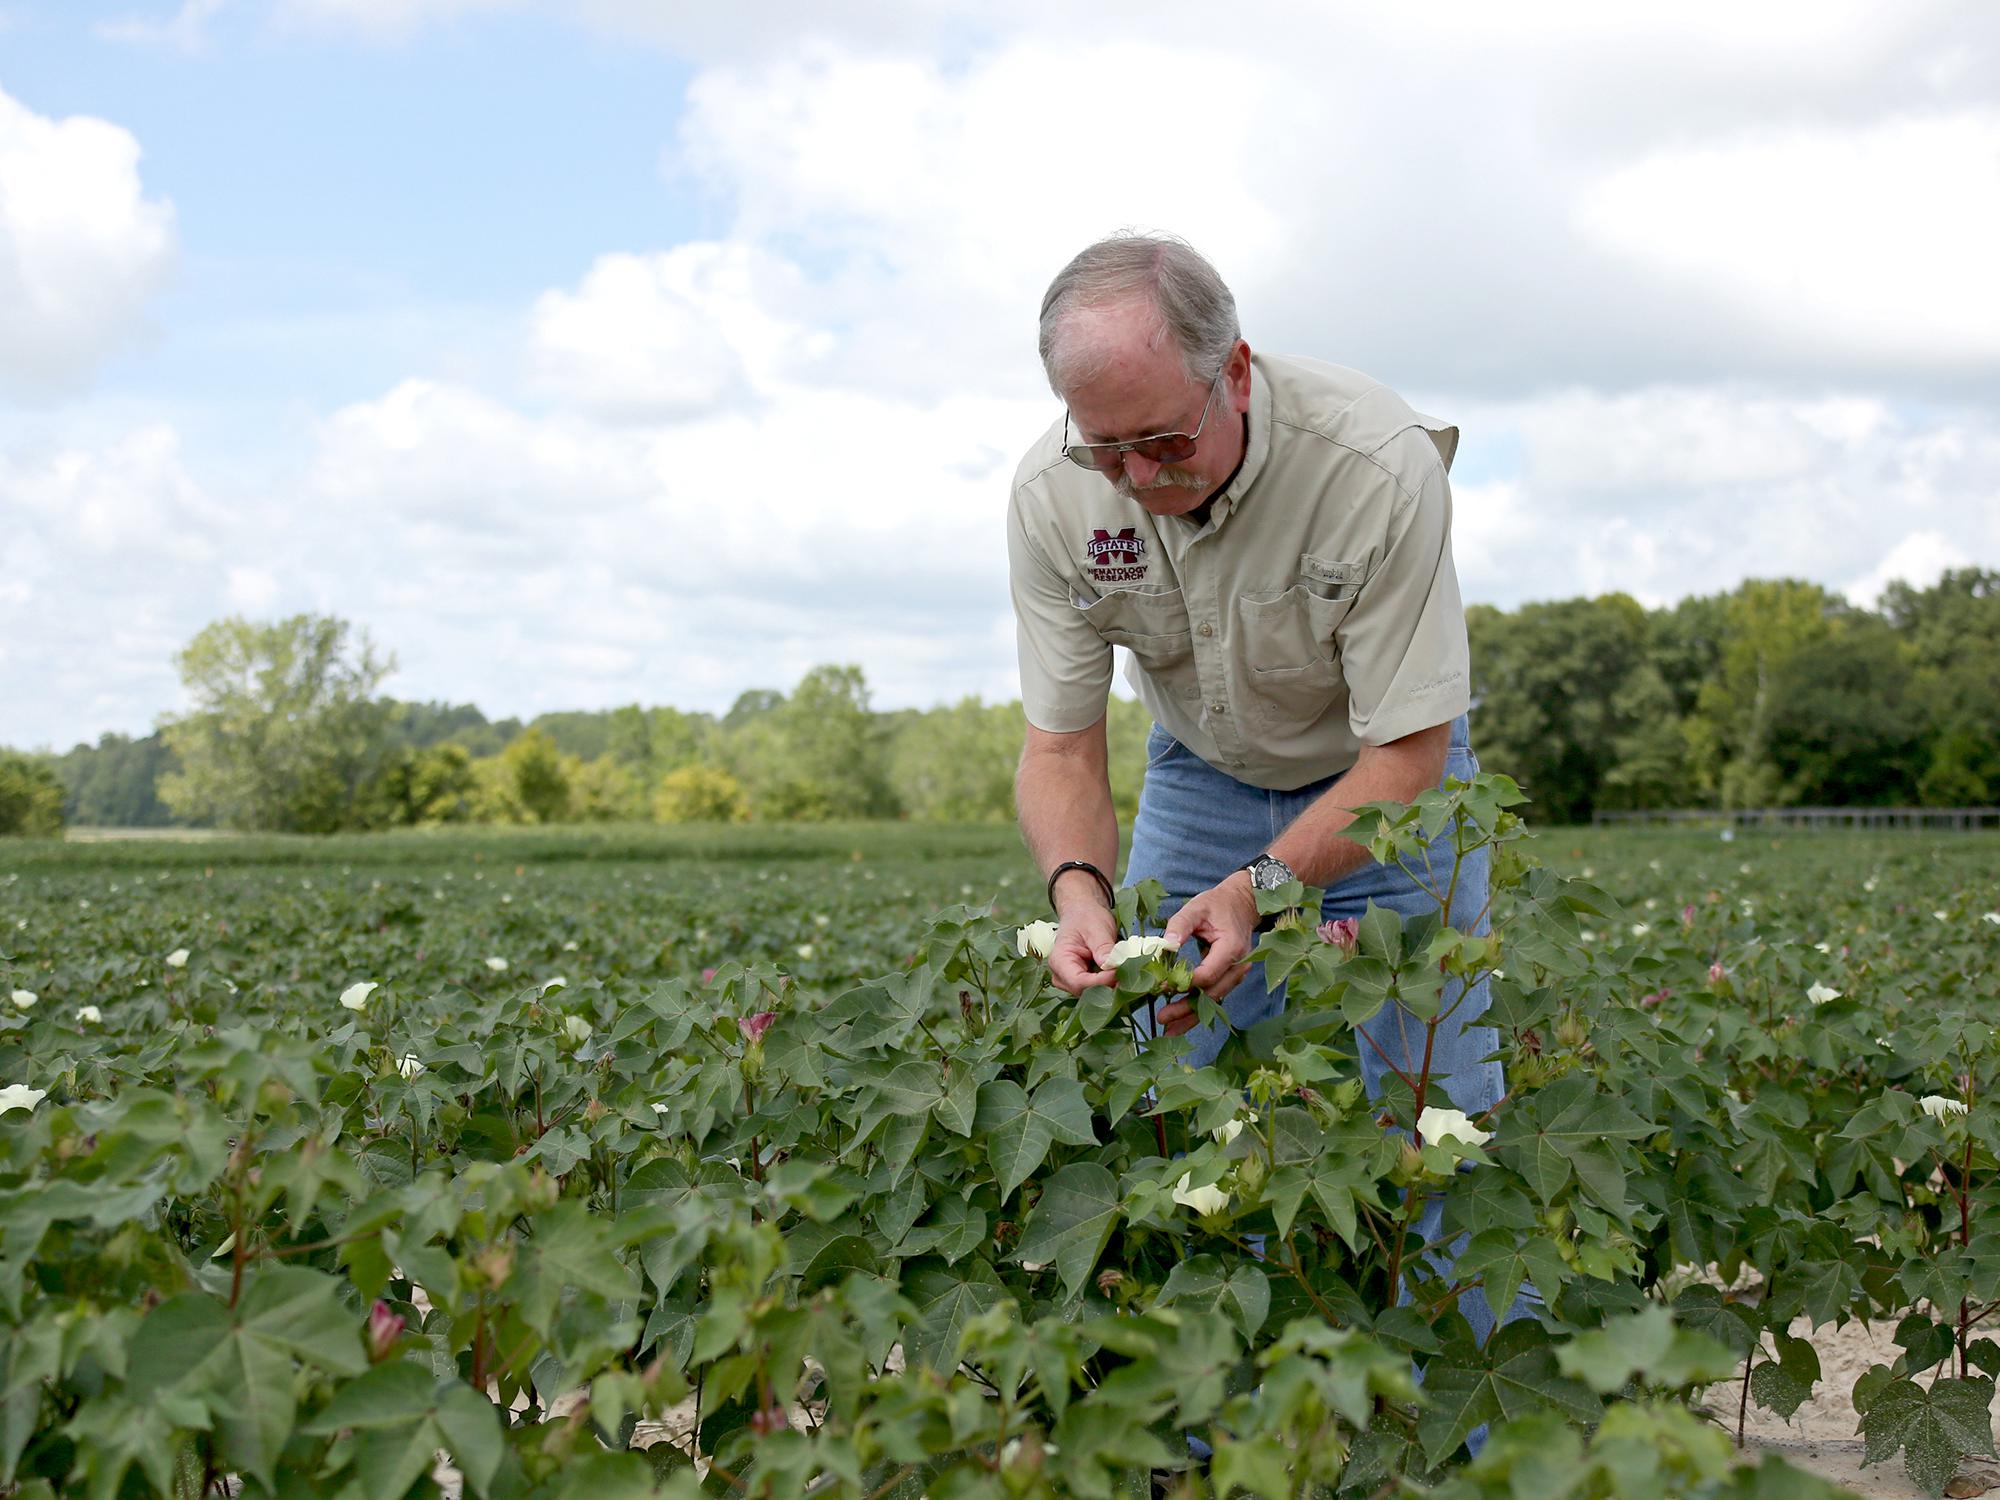  Gary Lawrence, Mississippi State University nematologist, examines cotton growing at the MSU R.R. Foil Plant Science Research Center in Starkville, Mississippi, on Aug. 11, 2015. (Photo by MSU Ag Communications/Kat Lawrence)